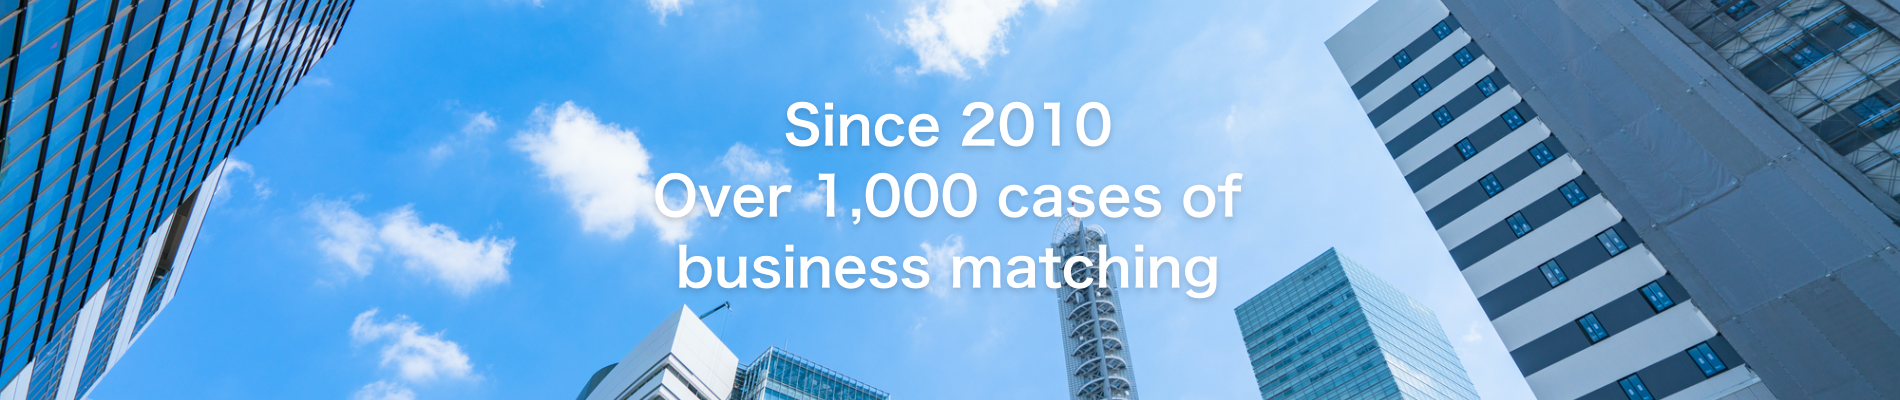 Since 2010 Over 1,000 casesofbusiness matching